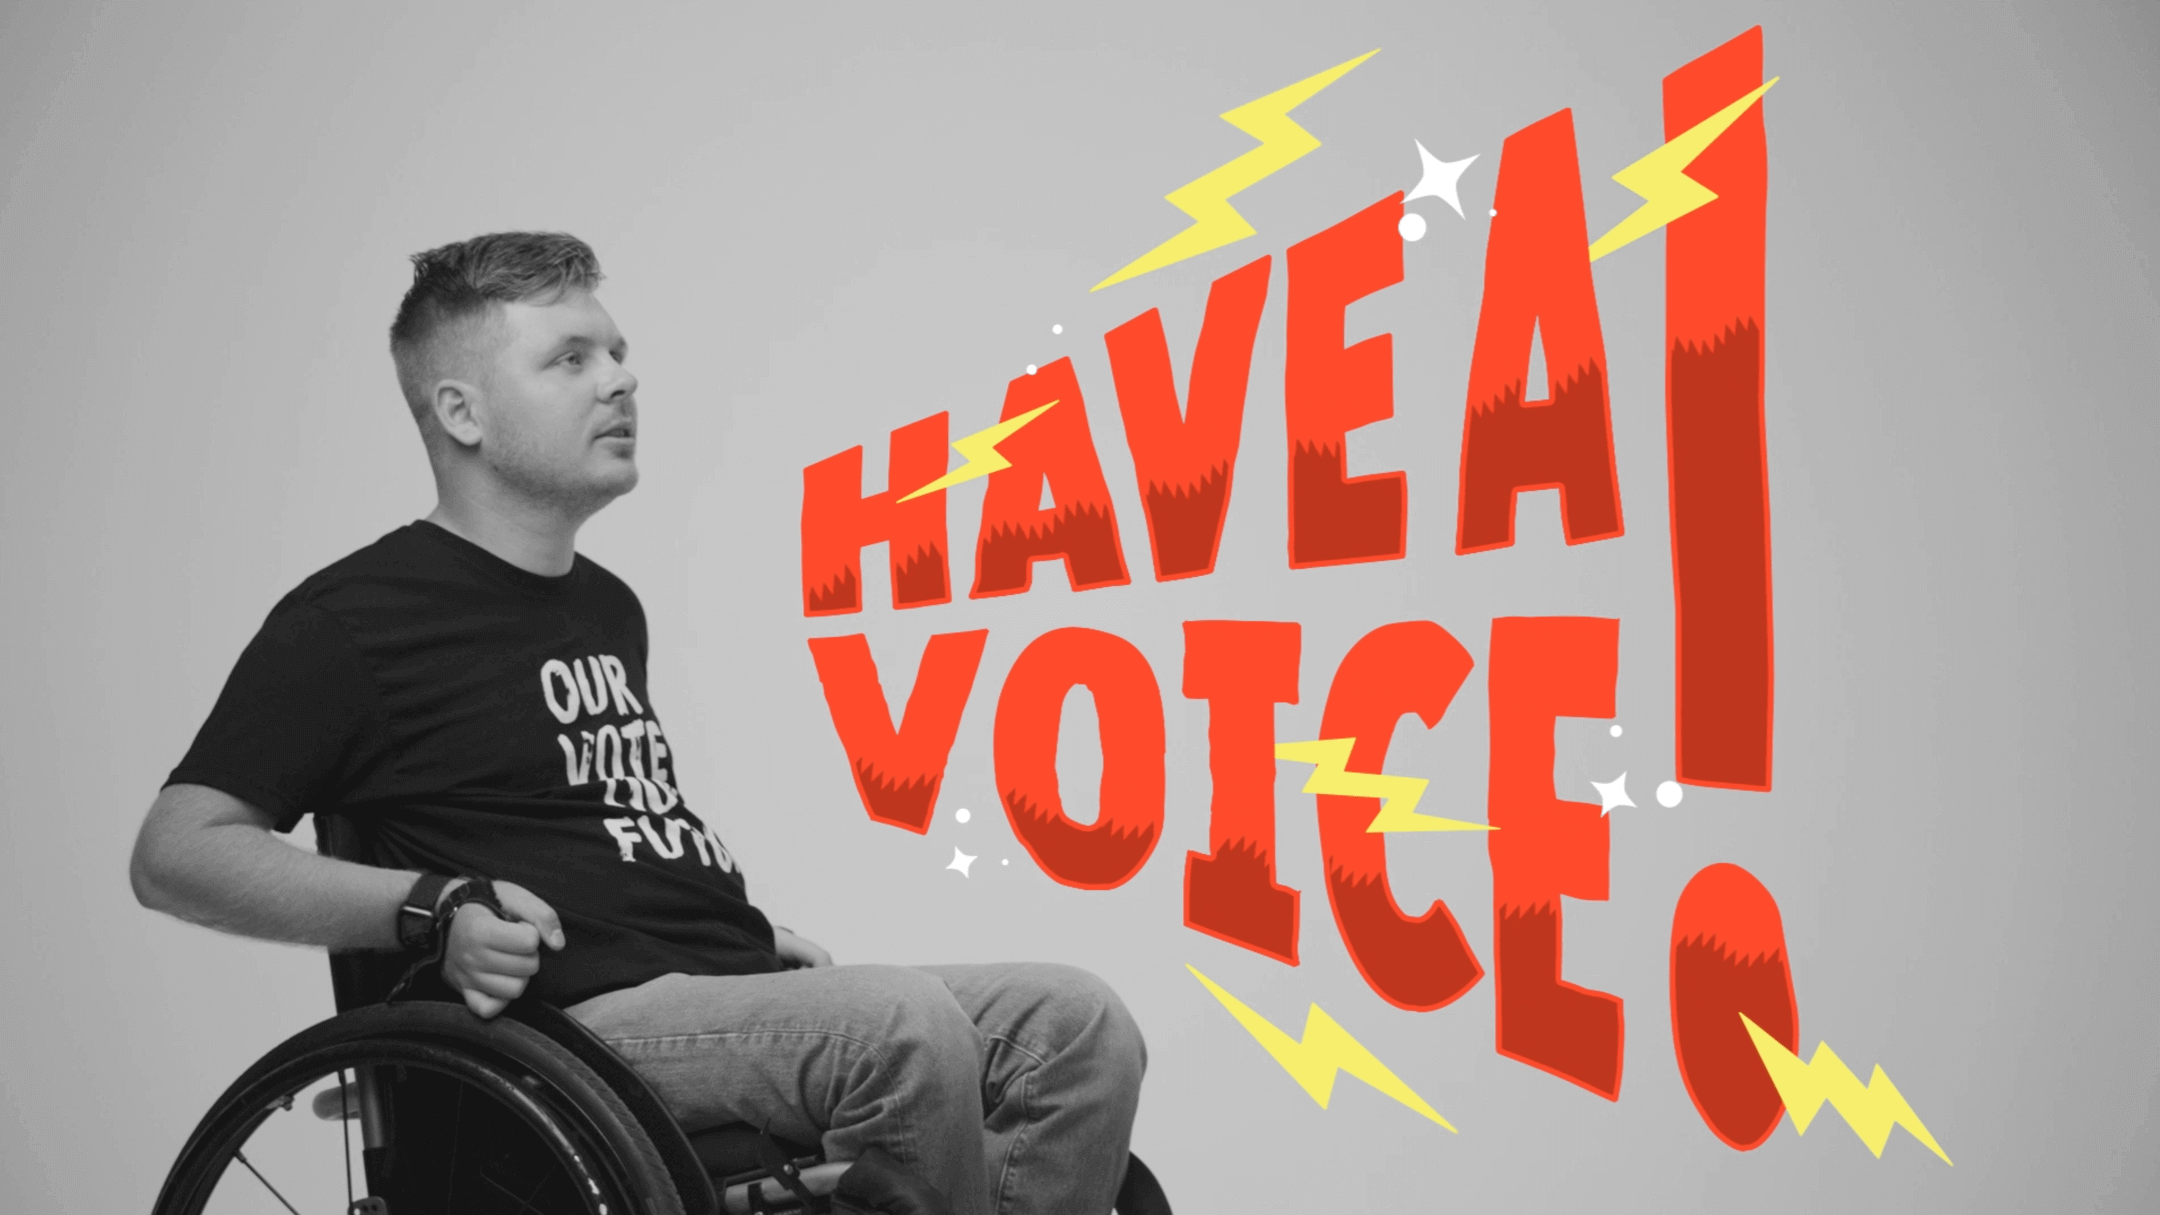 Making your voice heard